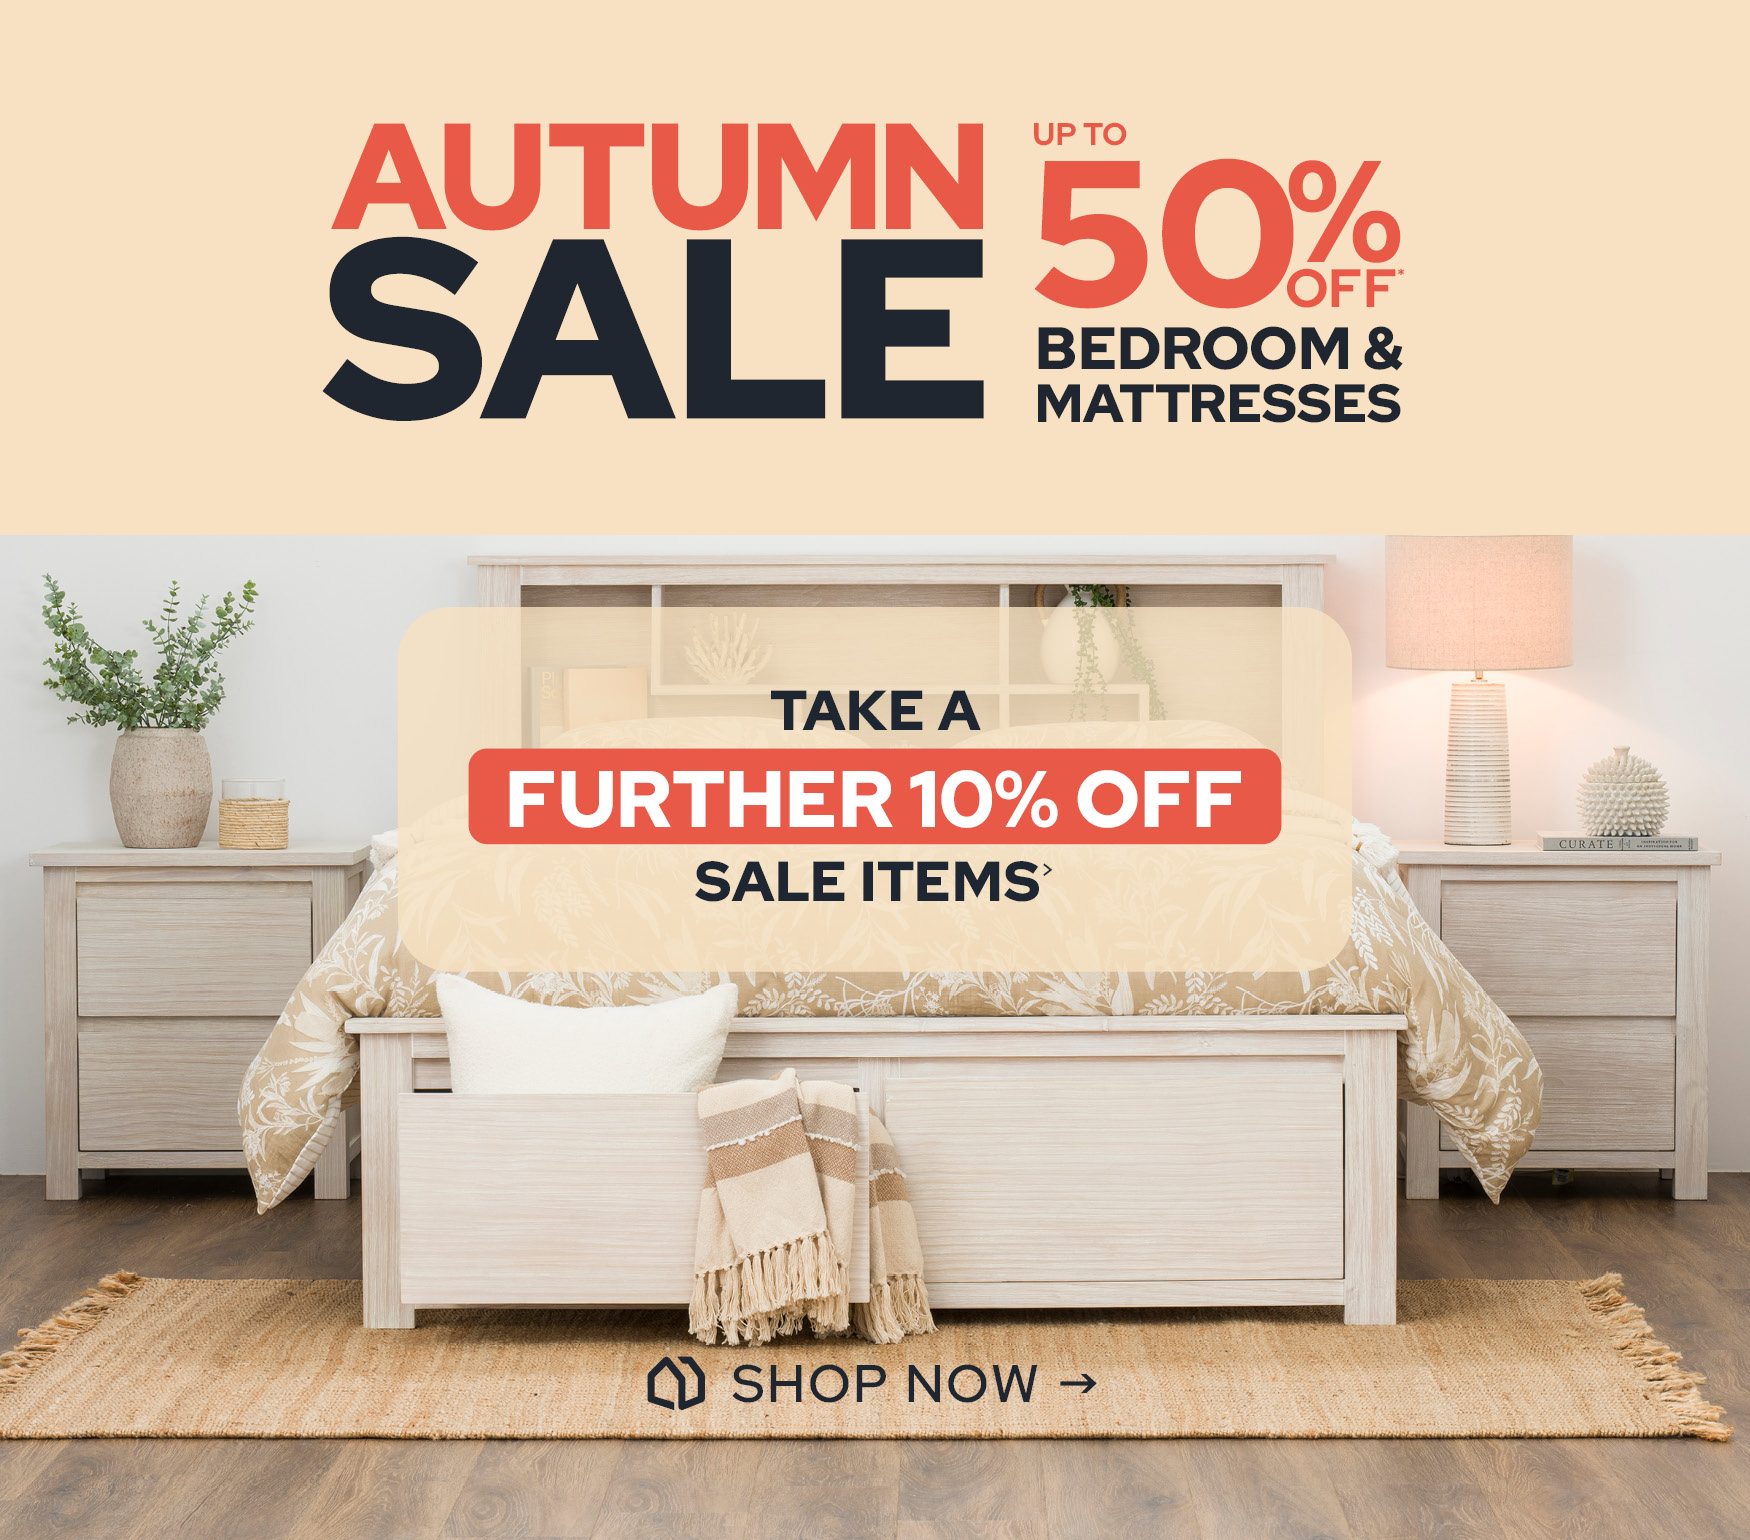 Autumn Sale: Take A Further 10% Off> Bedroom & Mattresses